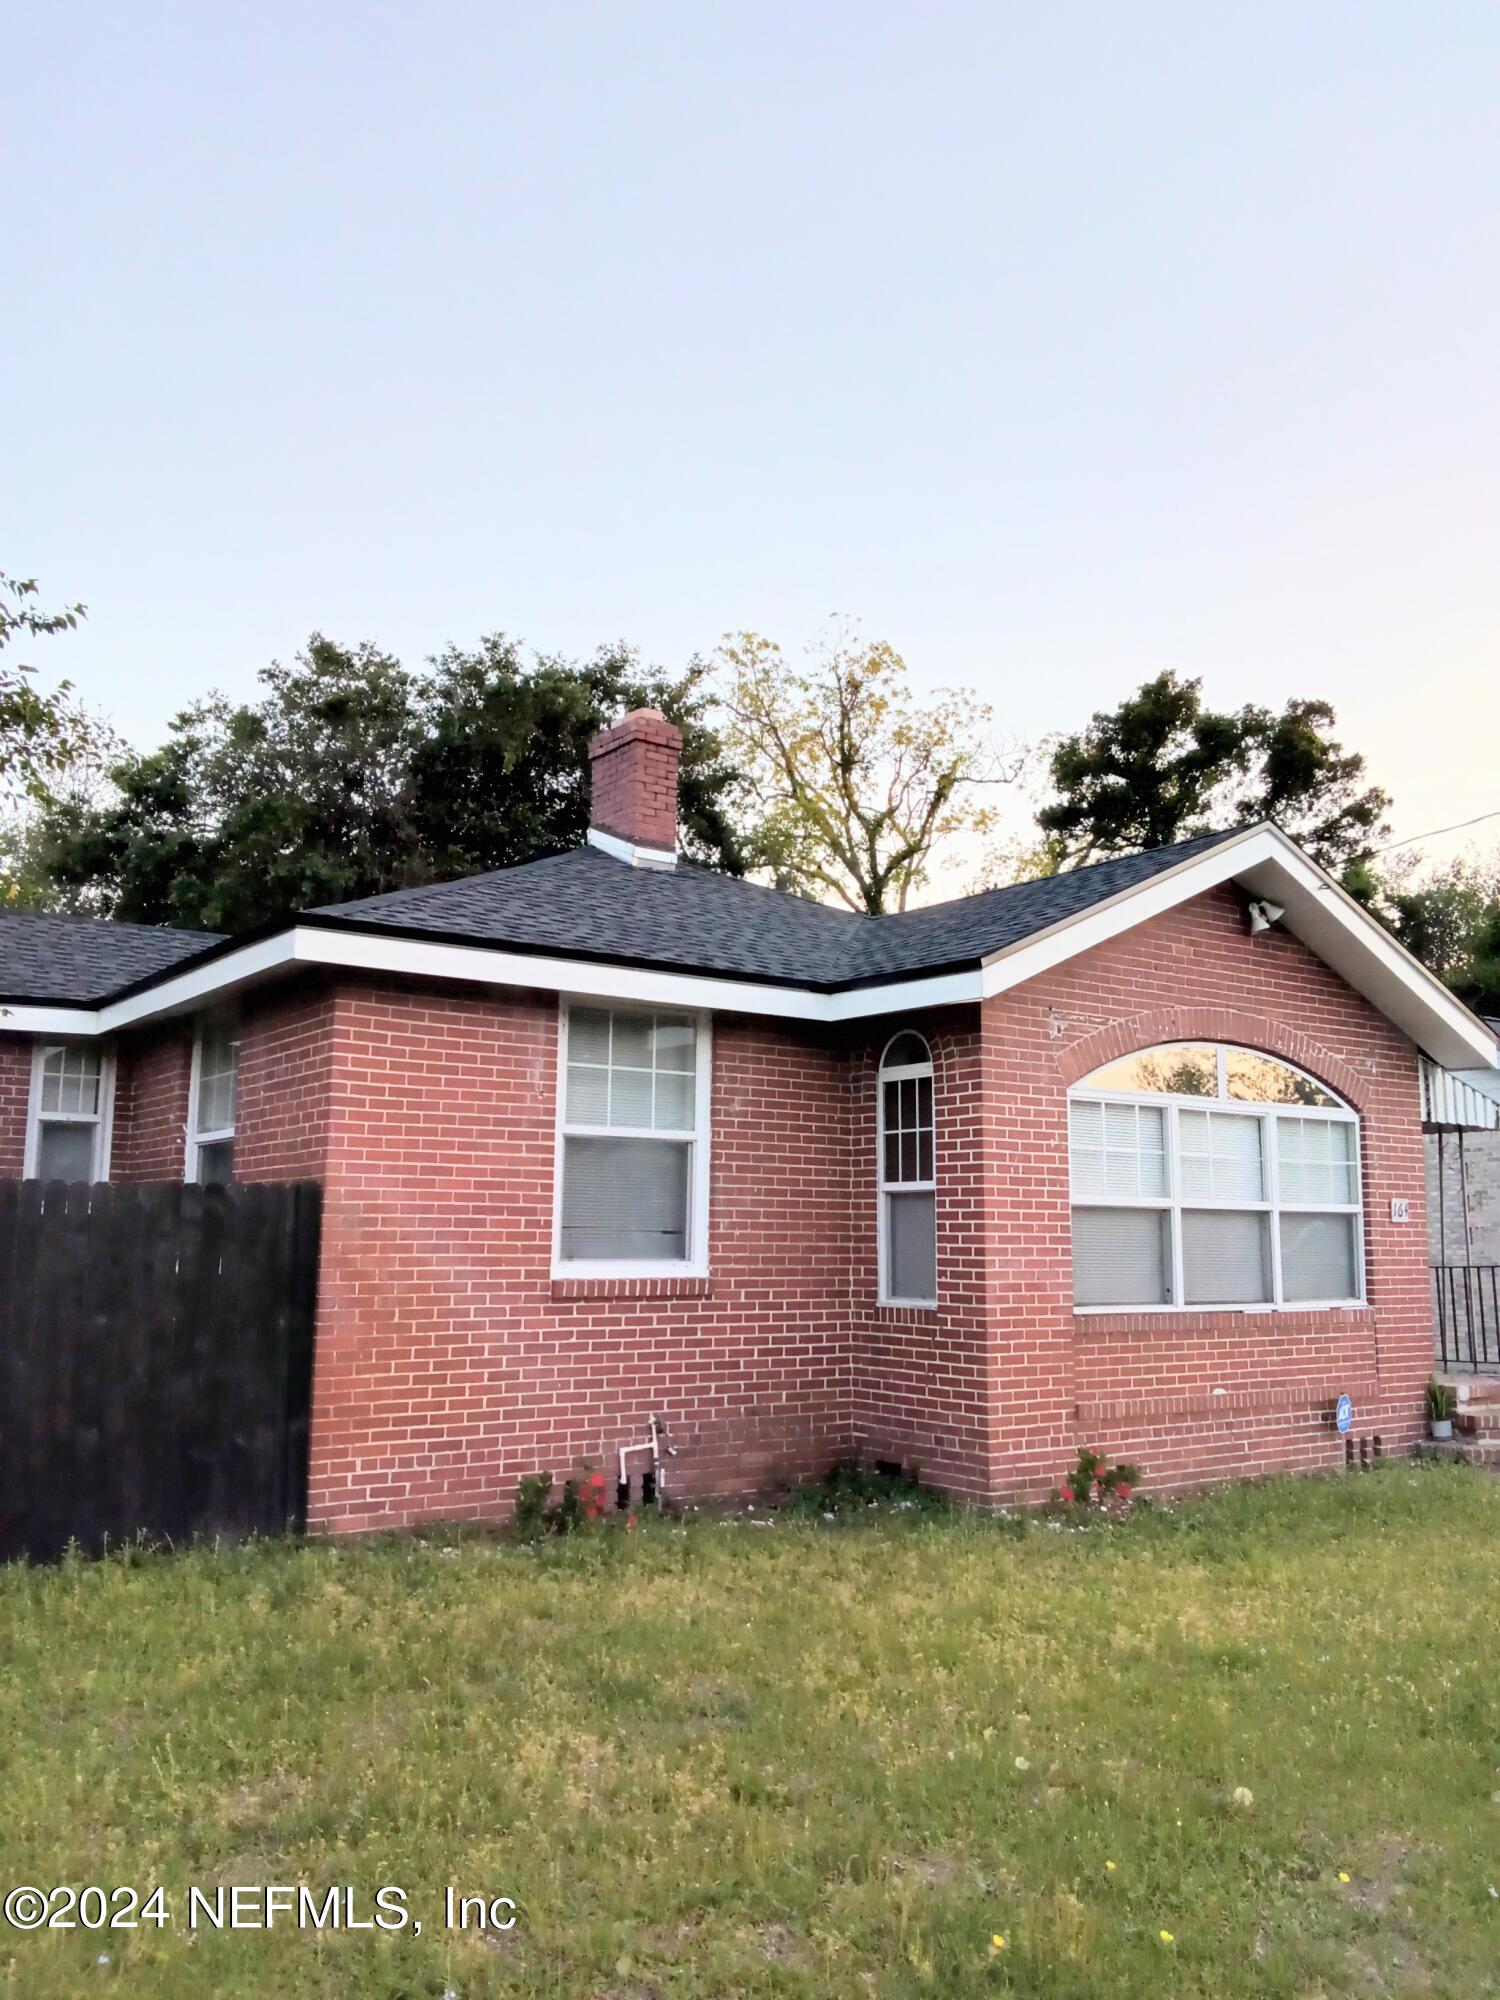 Jacksonville, FL home for sale located at 164 W 54th Street, Jacksonville, FL 32208